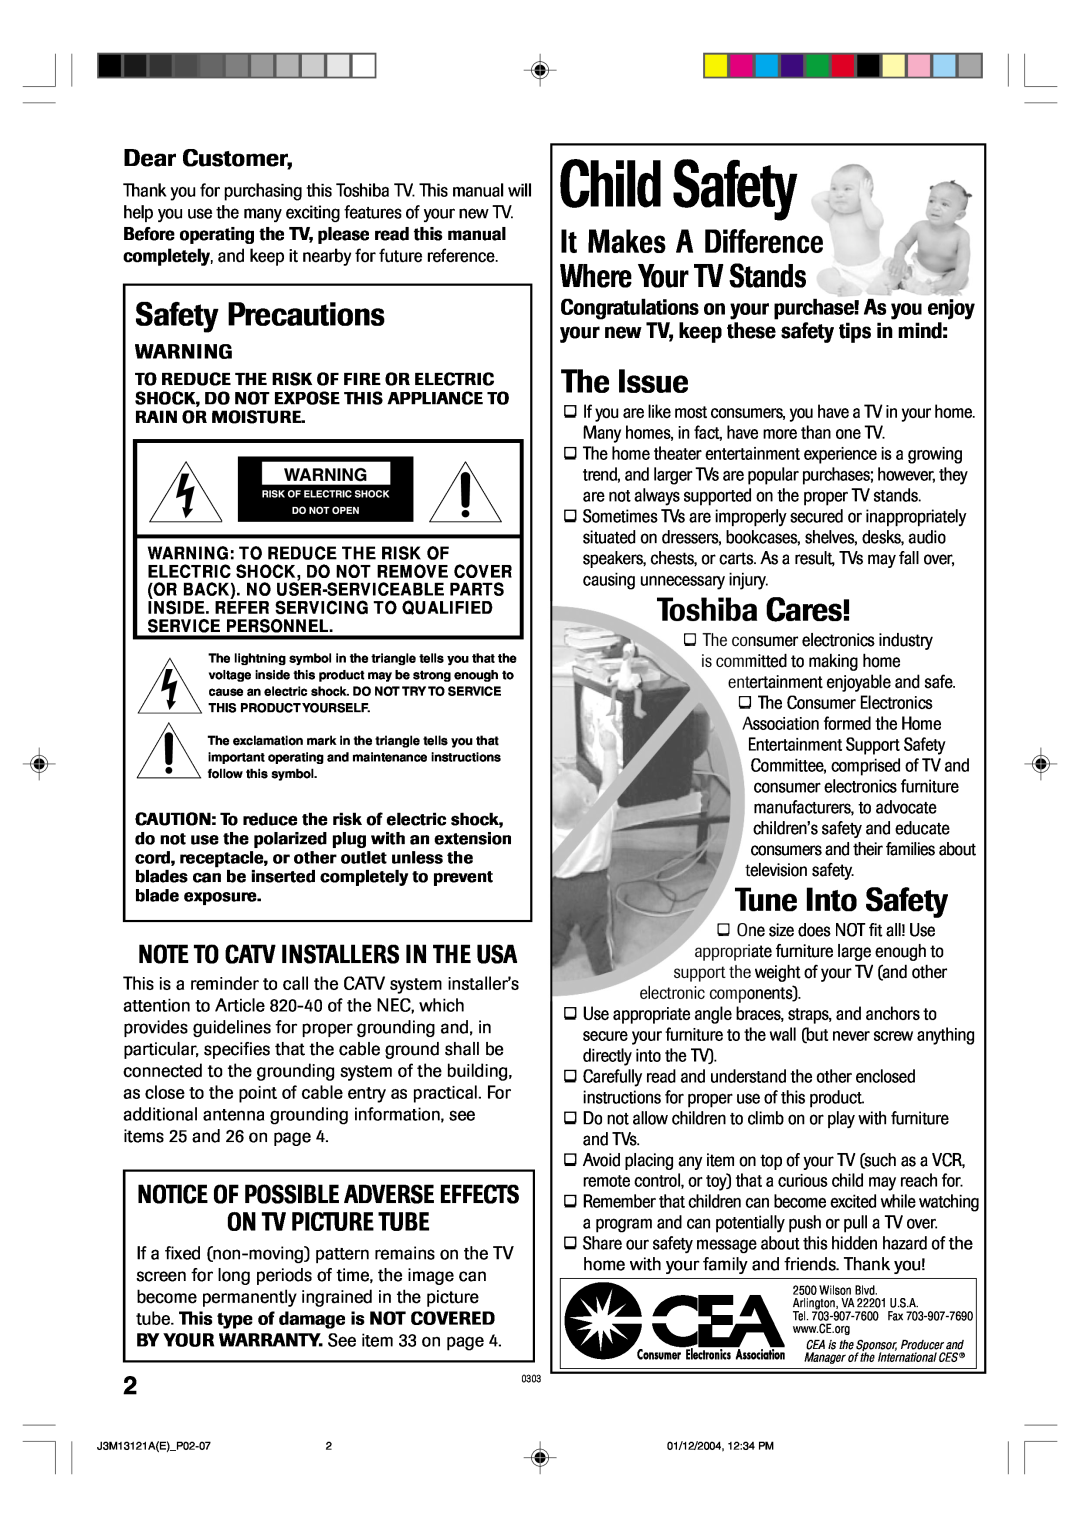 Toshiba 13A25 manual Child Safety, Safety Precautions, It Makes A Difference Where Your TV Stands, The Issue, Toshiba Cares 